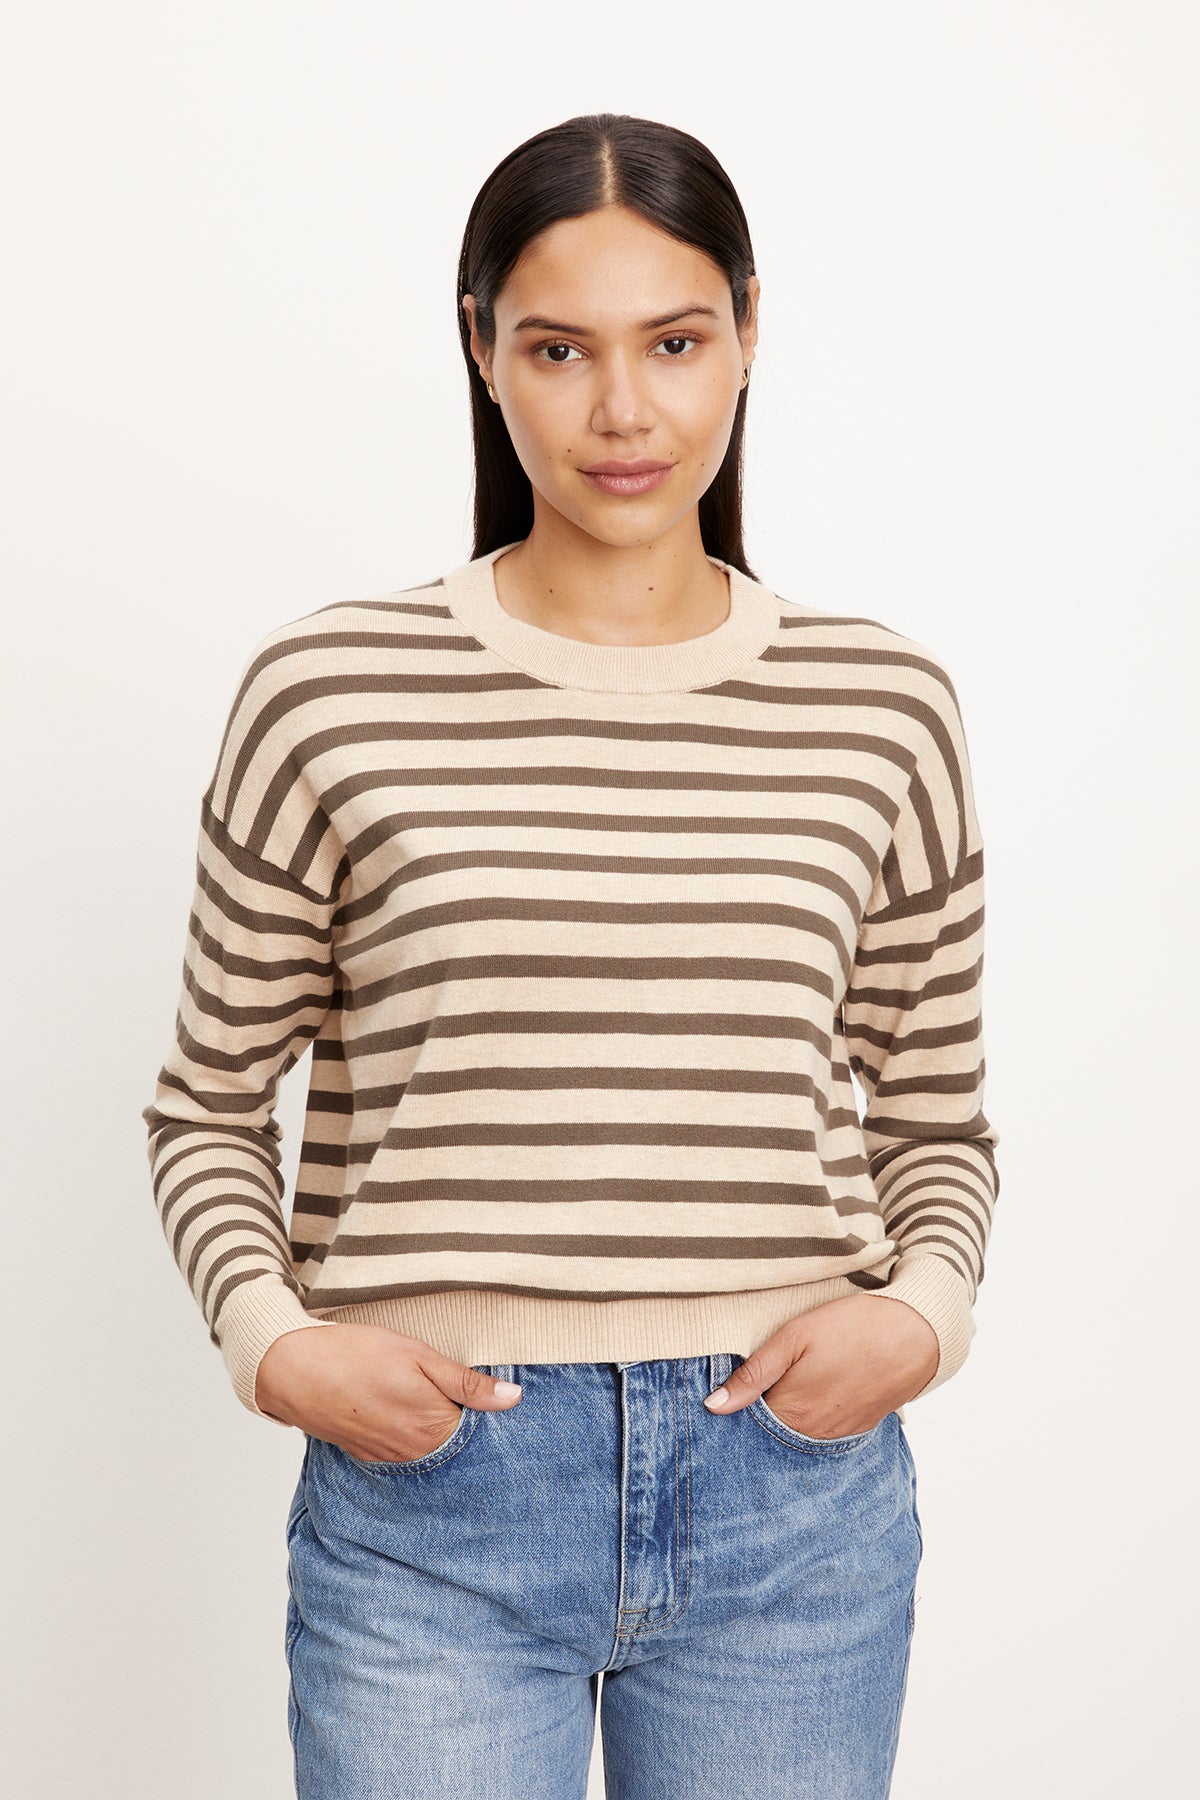 The model is wearing the ALISTER STRIPED CREW NECK SWEATER by Velvet by Graham & Spencer.-26799863365825